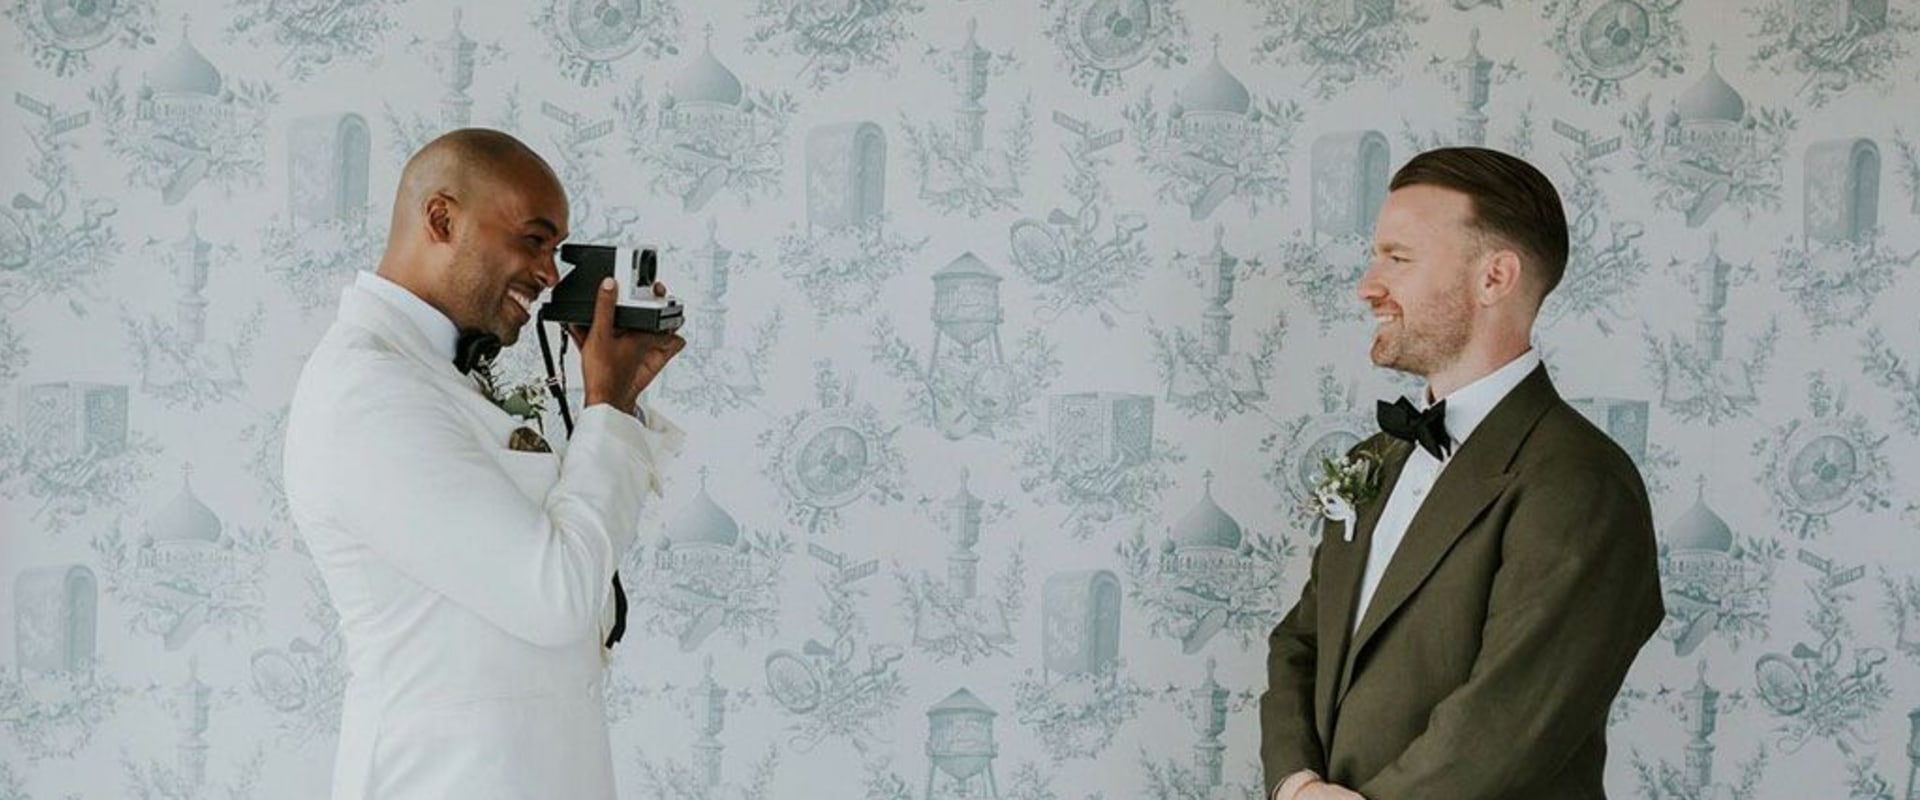 Choosing the Right Photographer for Your Wedding